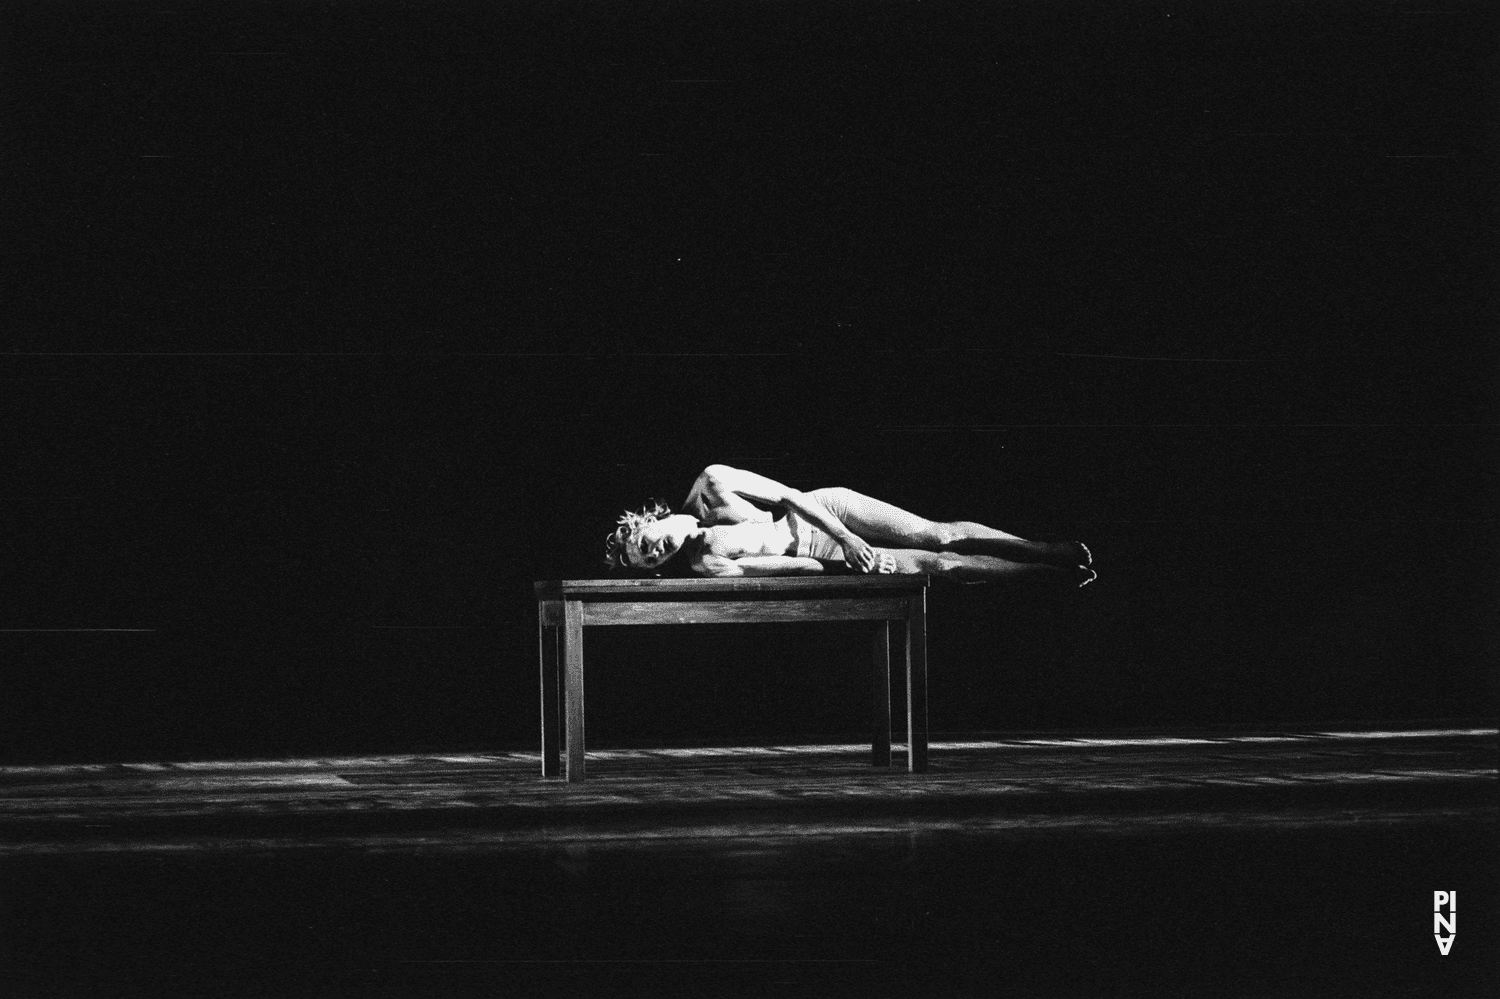 Dominique Mercy in “Iphigenie auf Tauris” by Pina Bausch with Tanztheater Wuppertal at Opernhaus Wuppertal (Germany), April 20, 1974